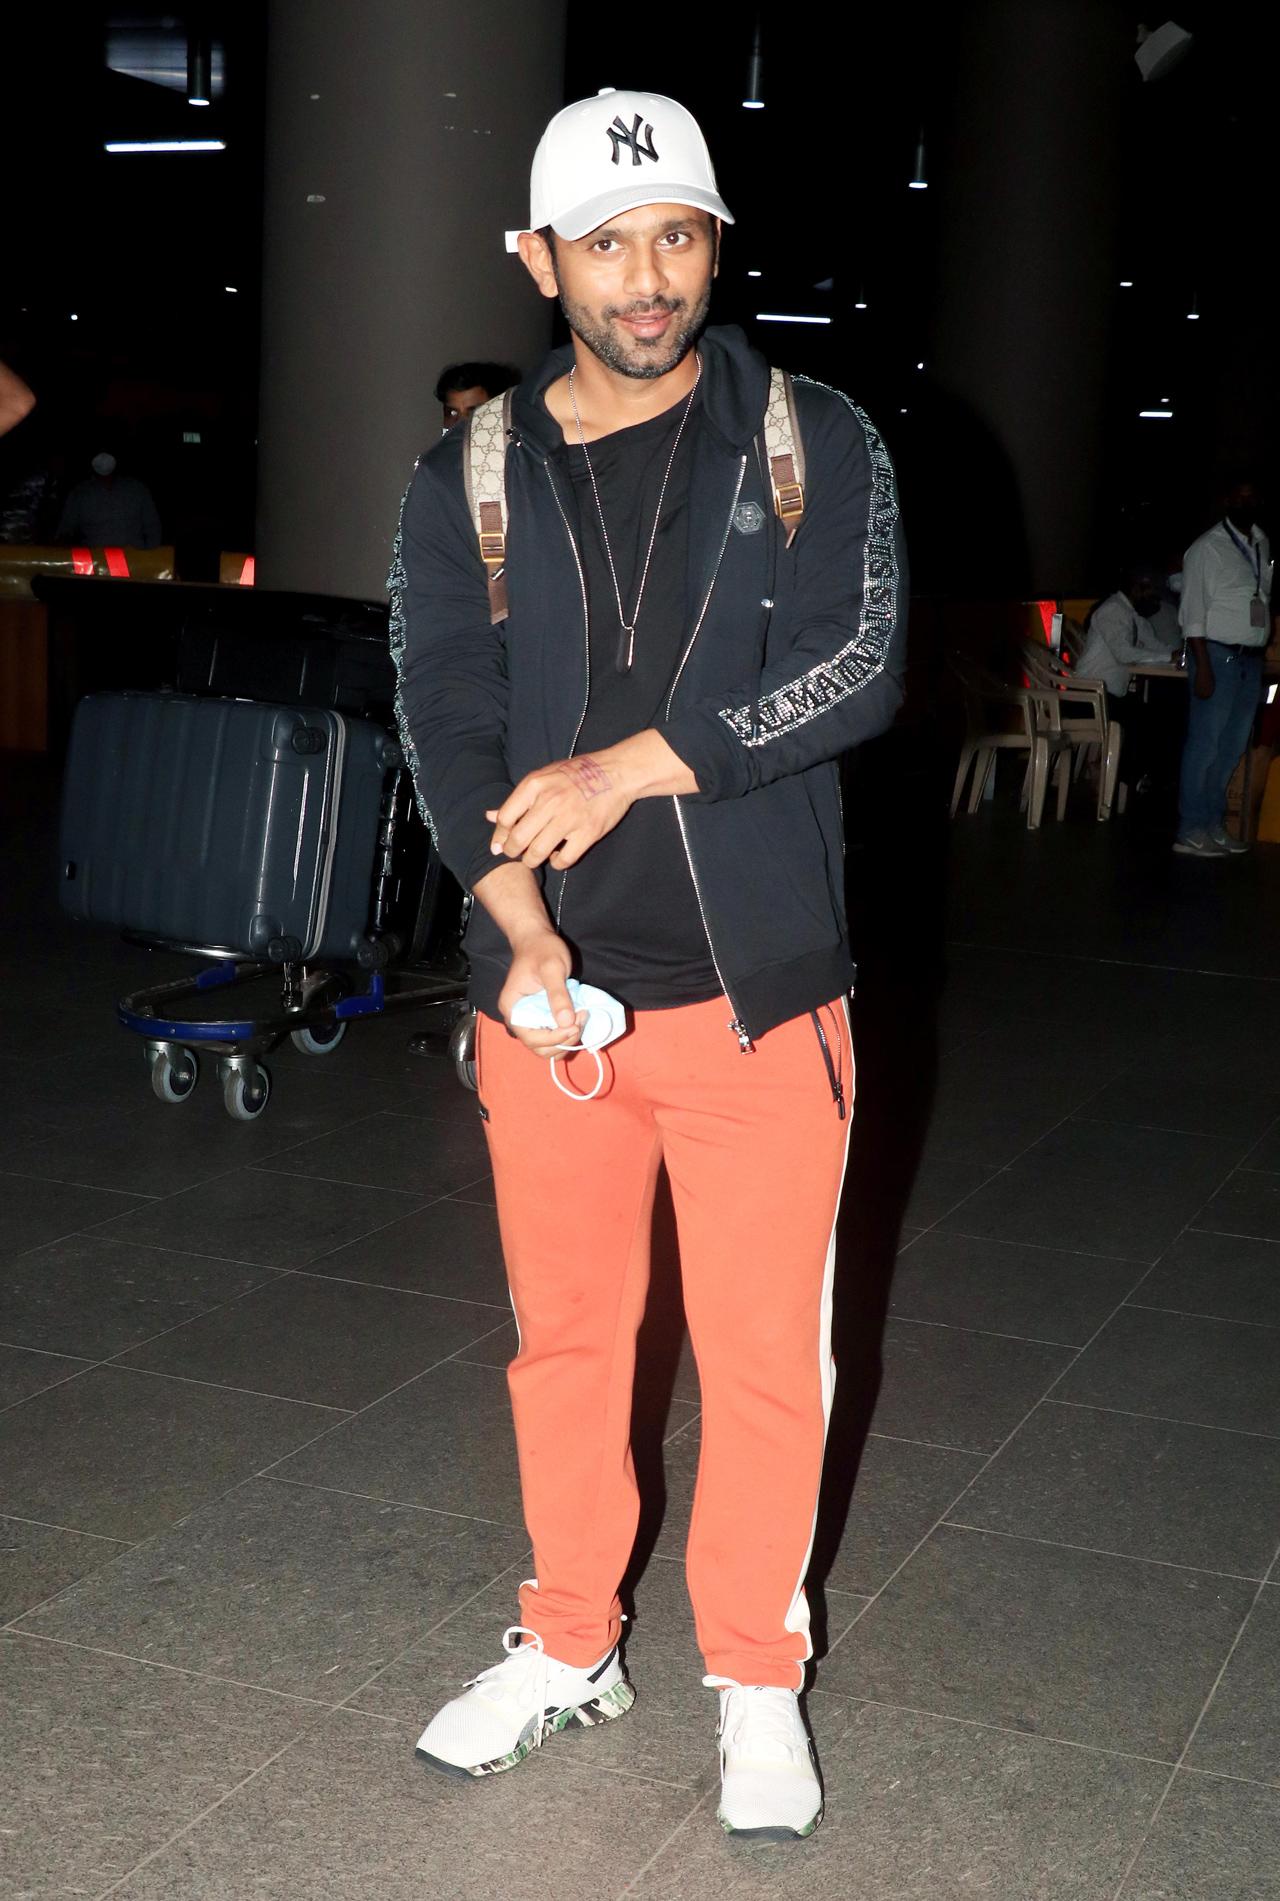 Rahul Vaidya, who too was part of the stunt-based reality show, was snapped at Mumbai airport. The actors were said to be heading straight to a hotel, where they will quarantine for a few days.